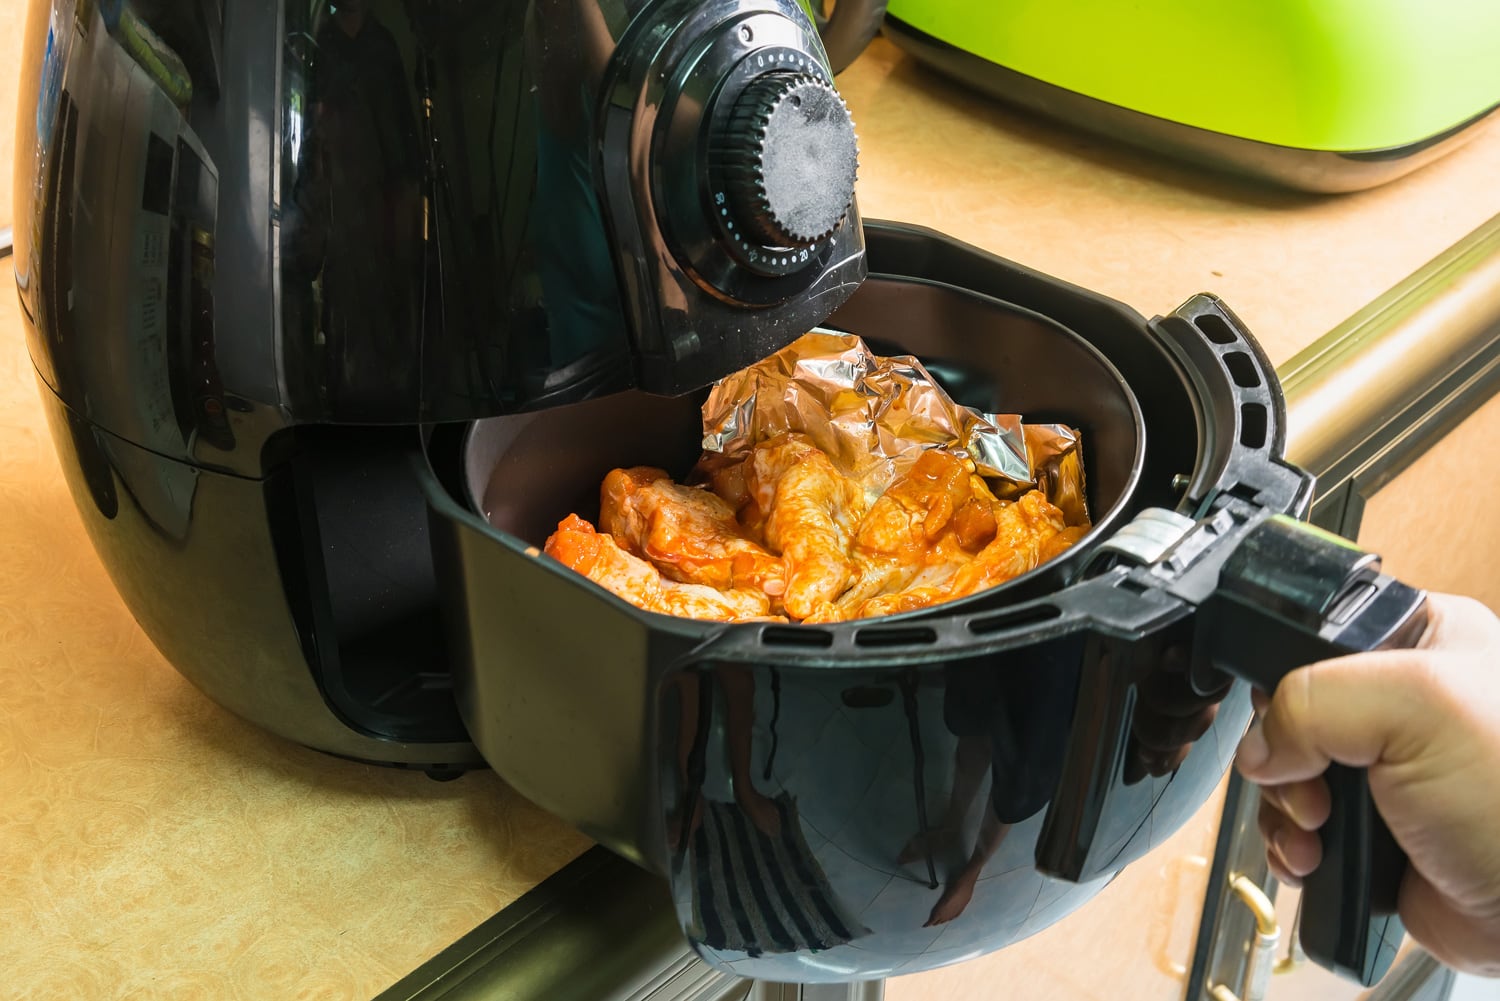 Chef's Grill BBQ Chicken Legs in oven air fryer. healthy cooking without oil